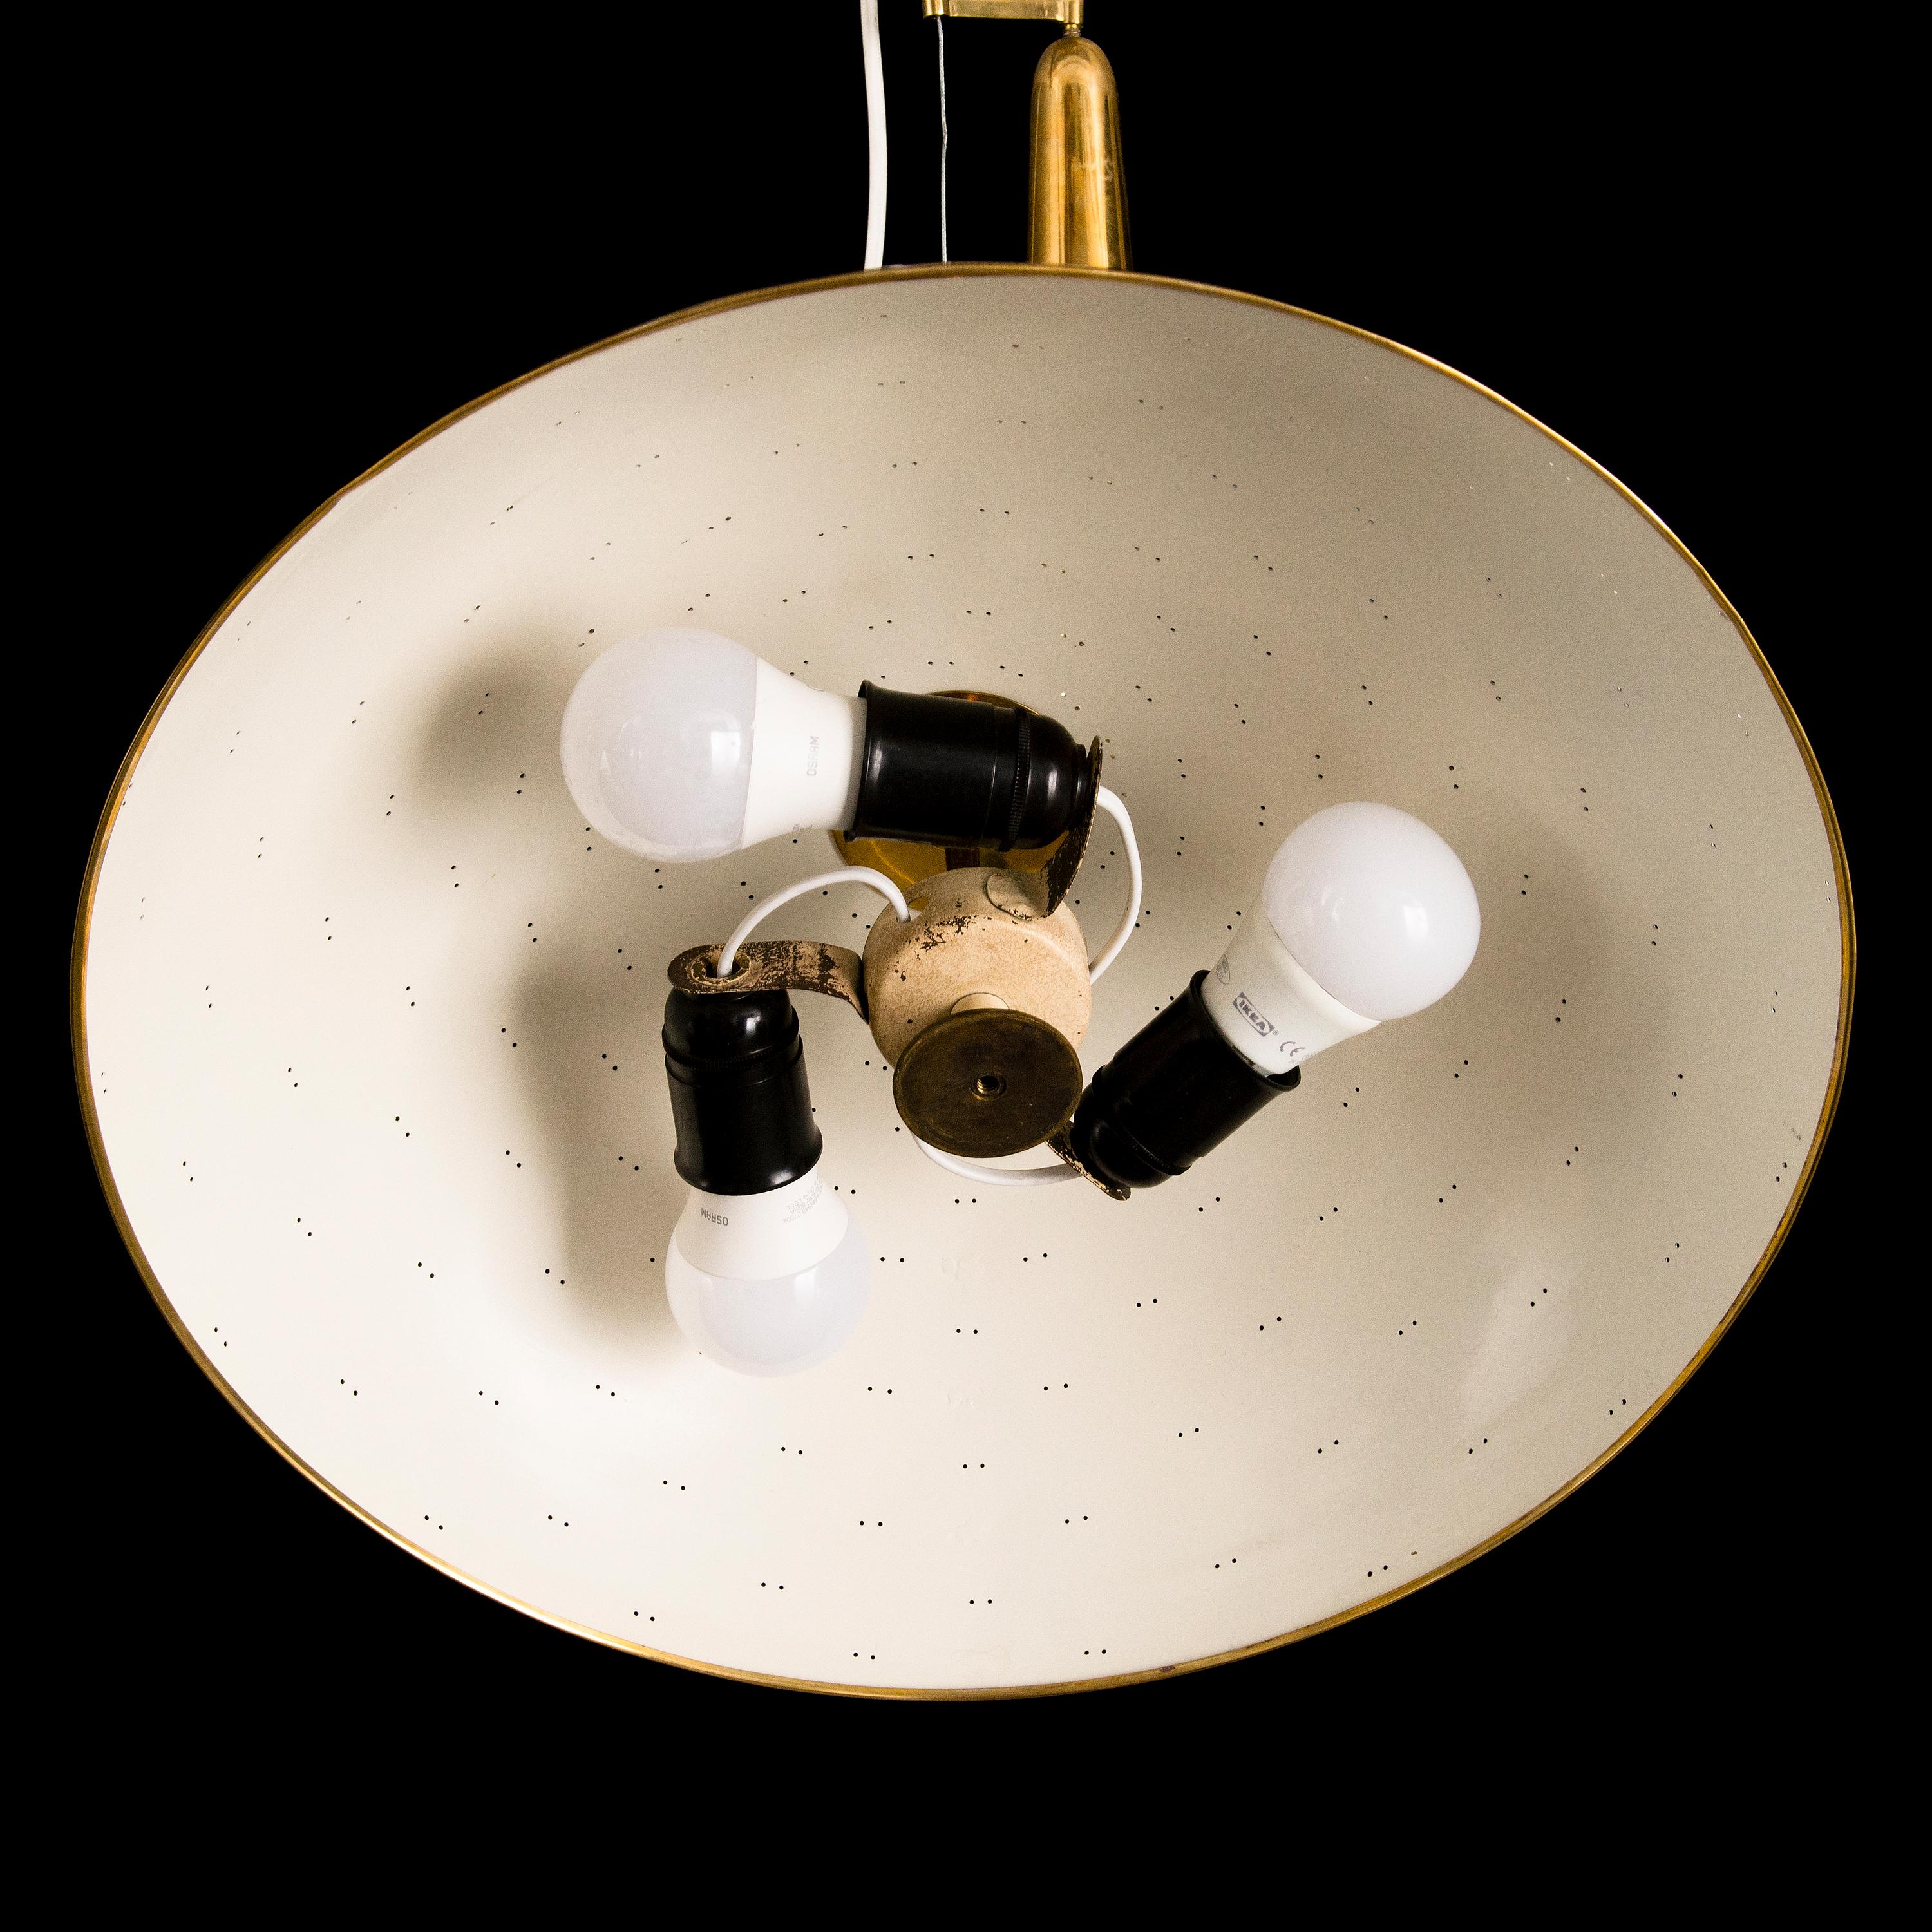 Paavo Tynell
Rare model N° 1965  pendant lamp from Paavo Tynell (Finland, 1890-1973)  in Polished brass adiustable ceiling lamp, with perforated shade and counterweight mechanism. Diameter 45 cm.
Good condition with beautiful patina , fully restored